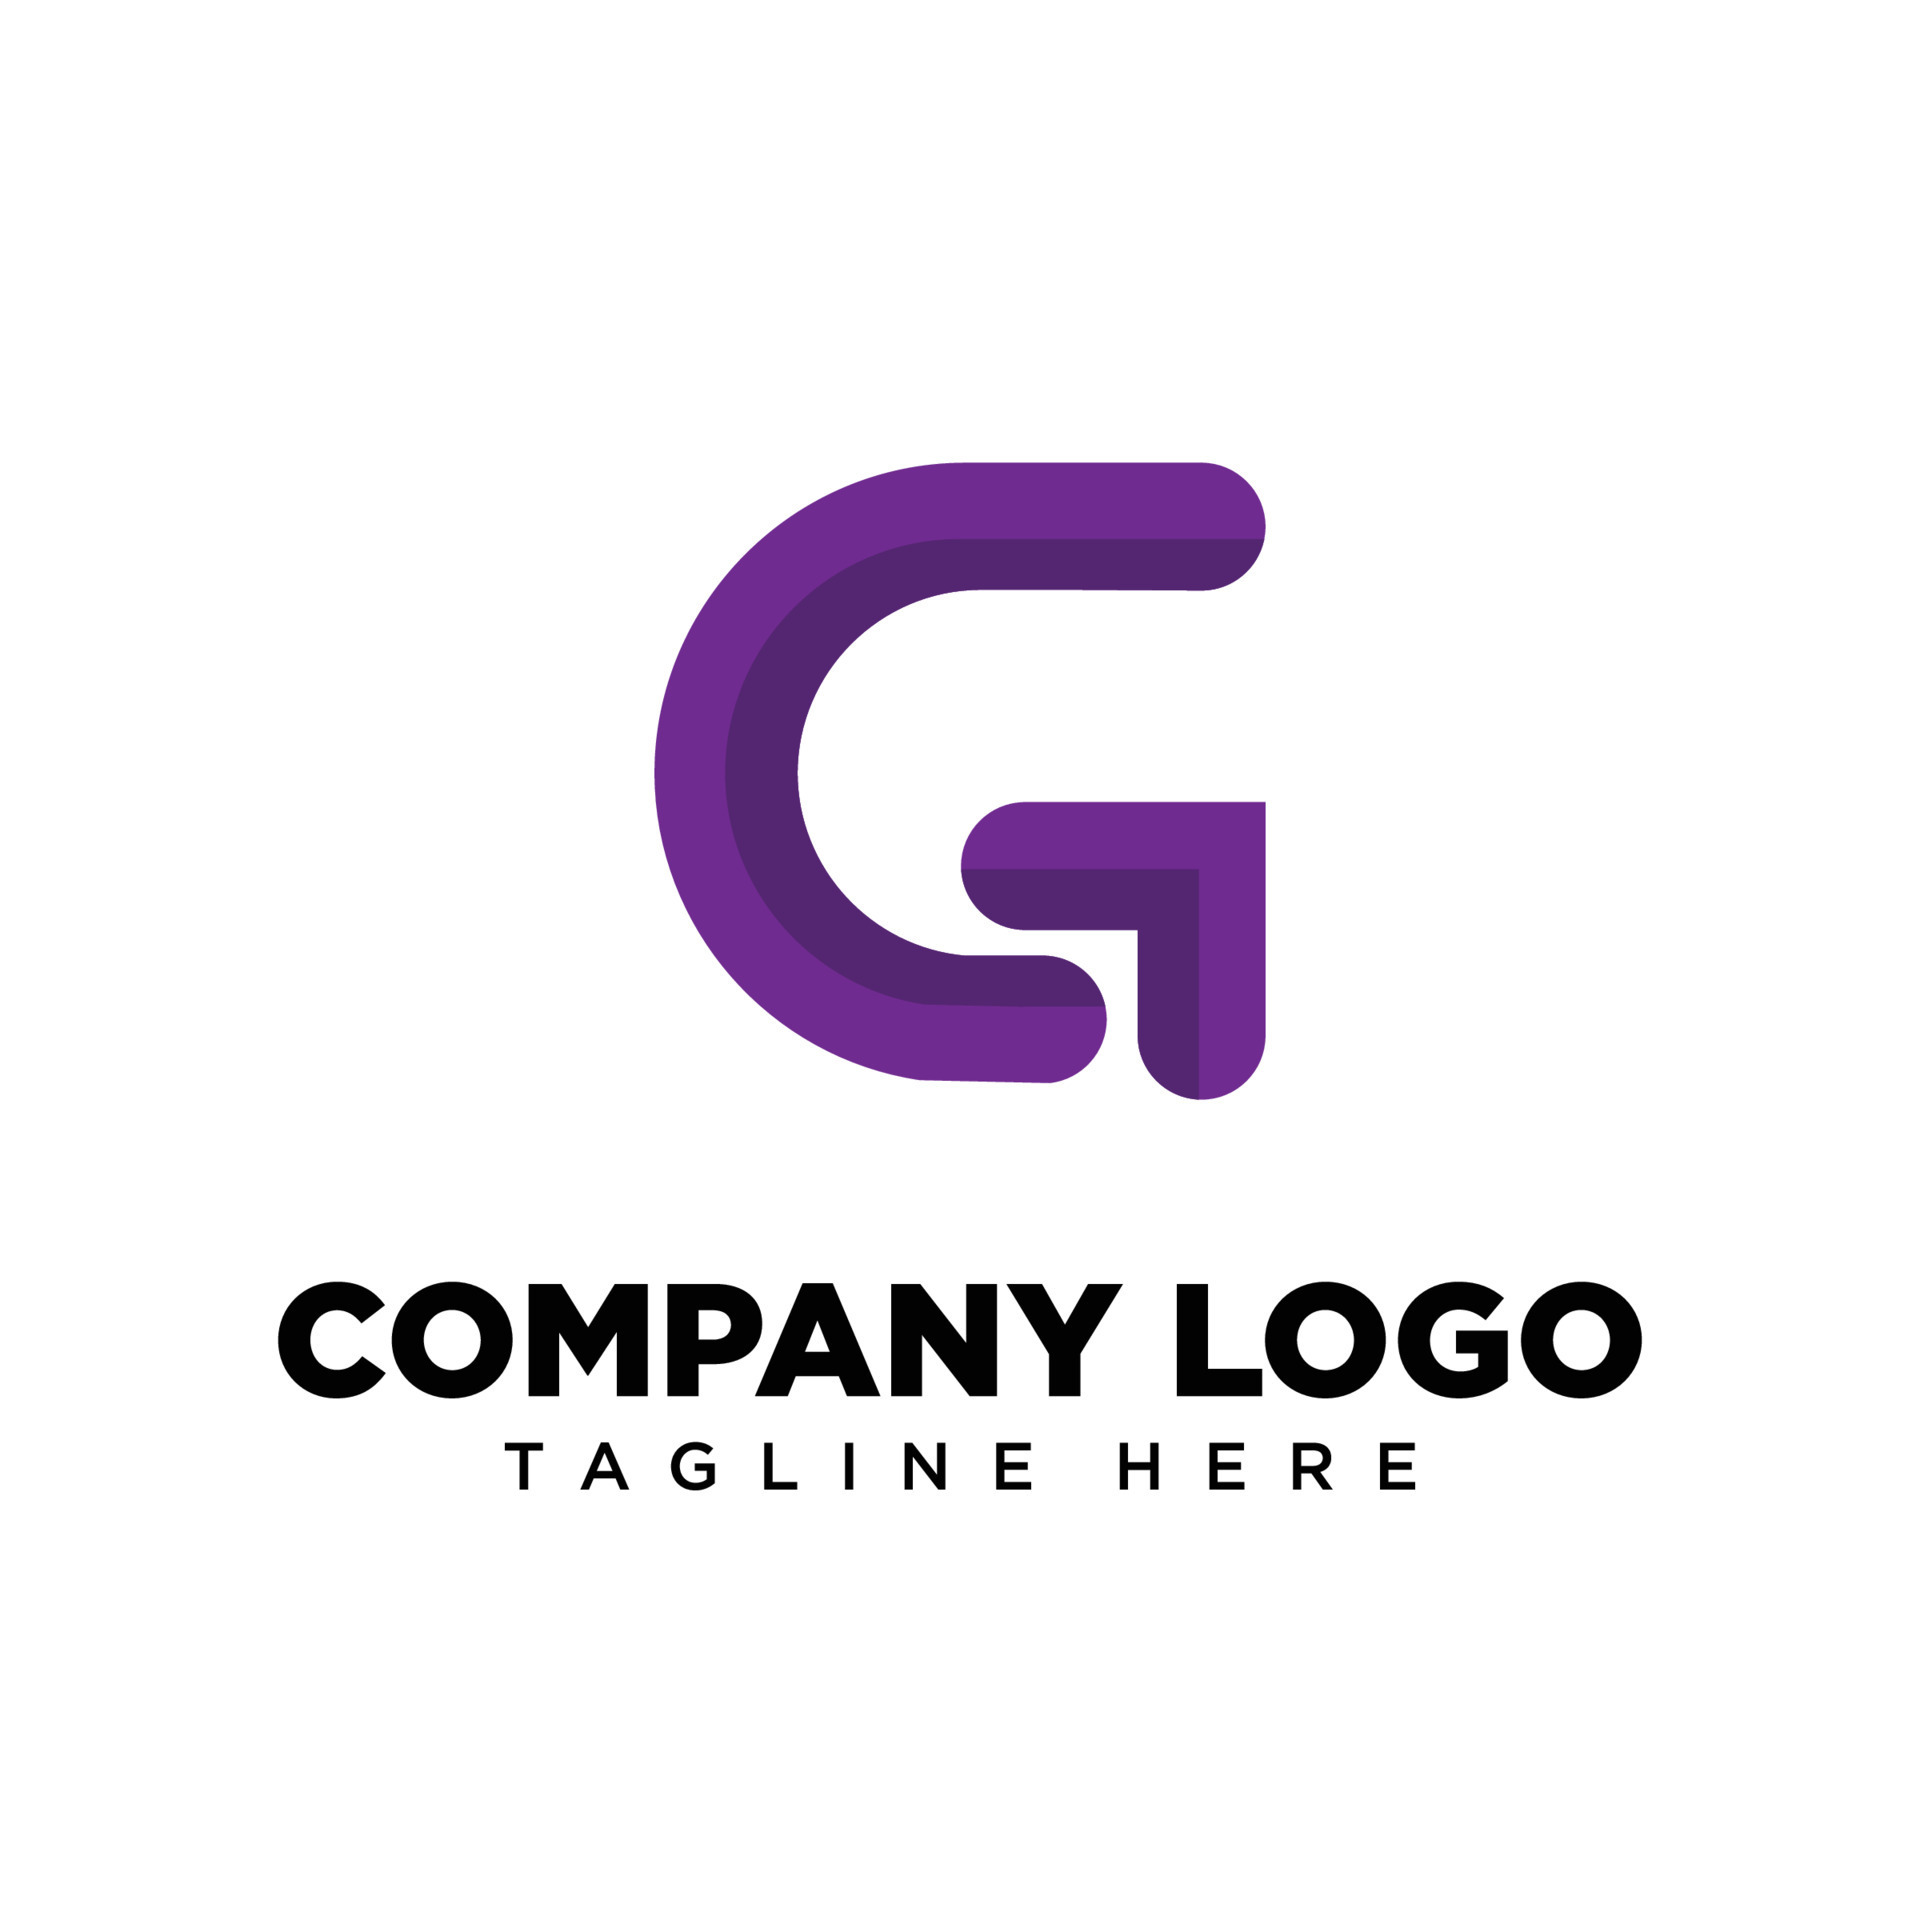 Logo design letter G suitable for company, community, personal logos ...